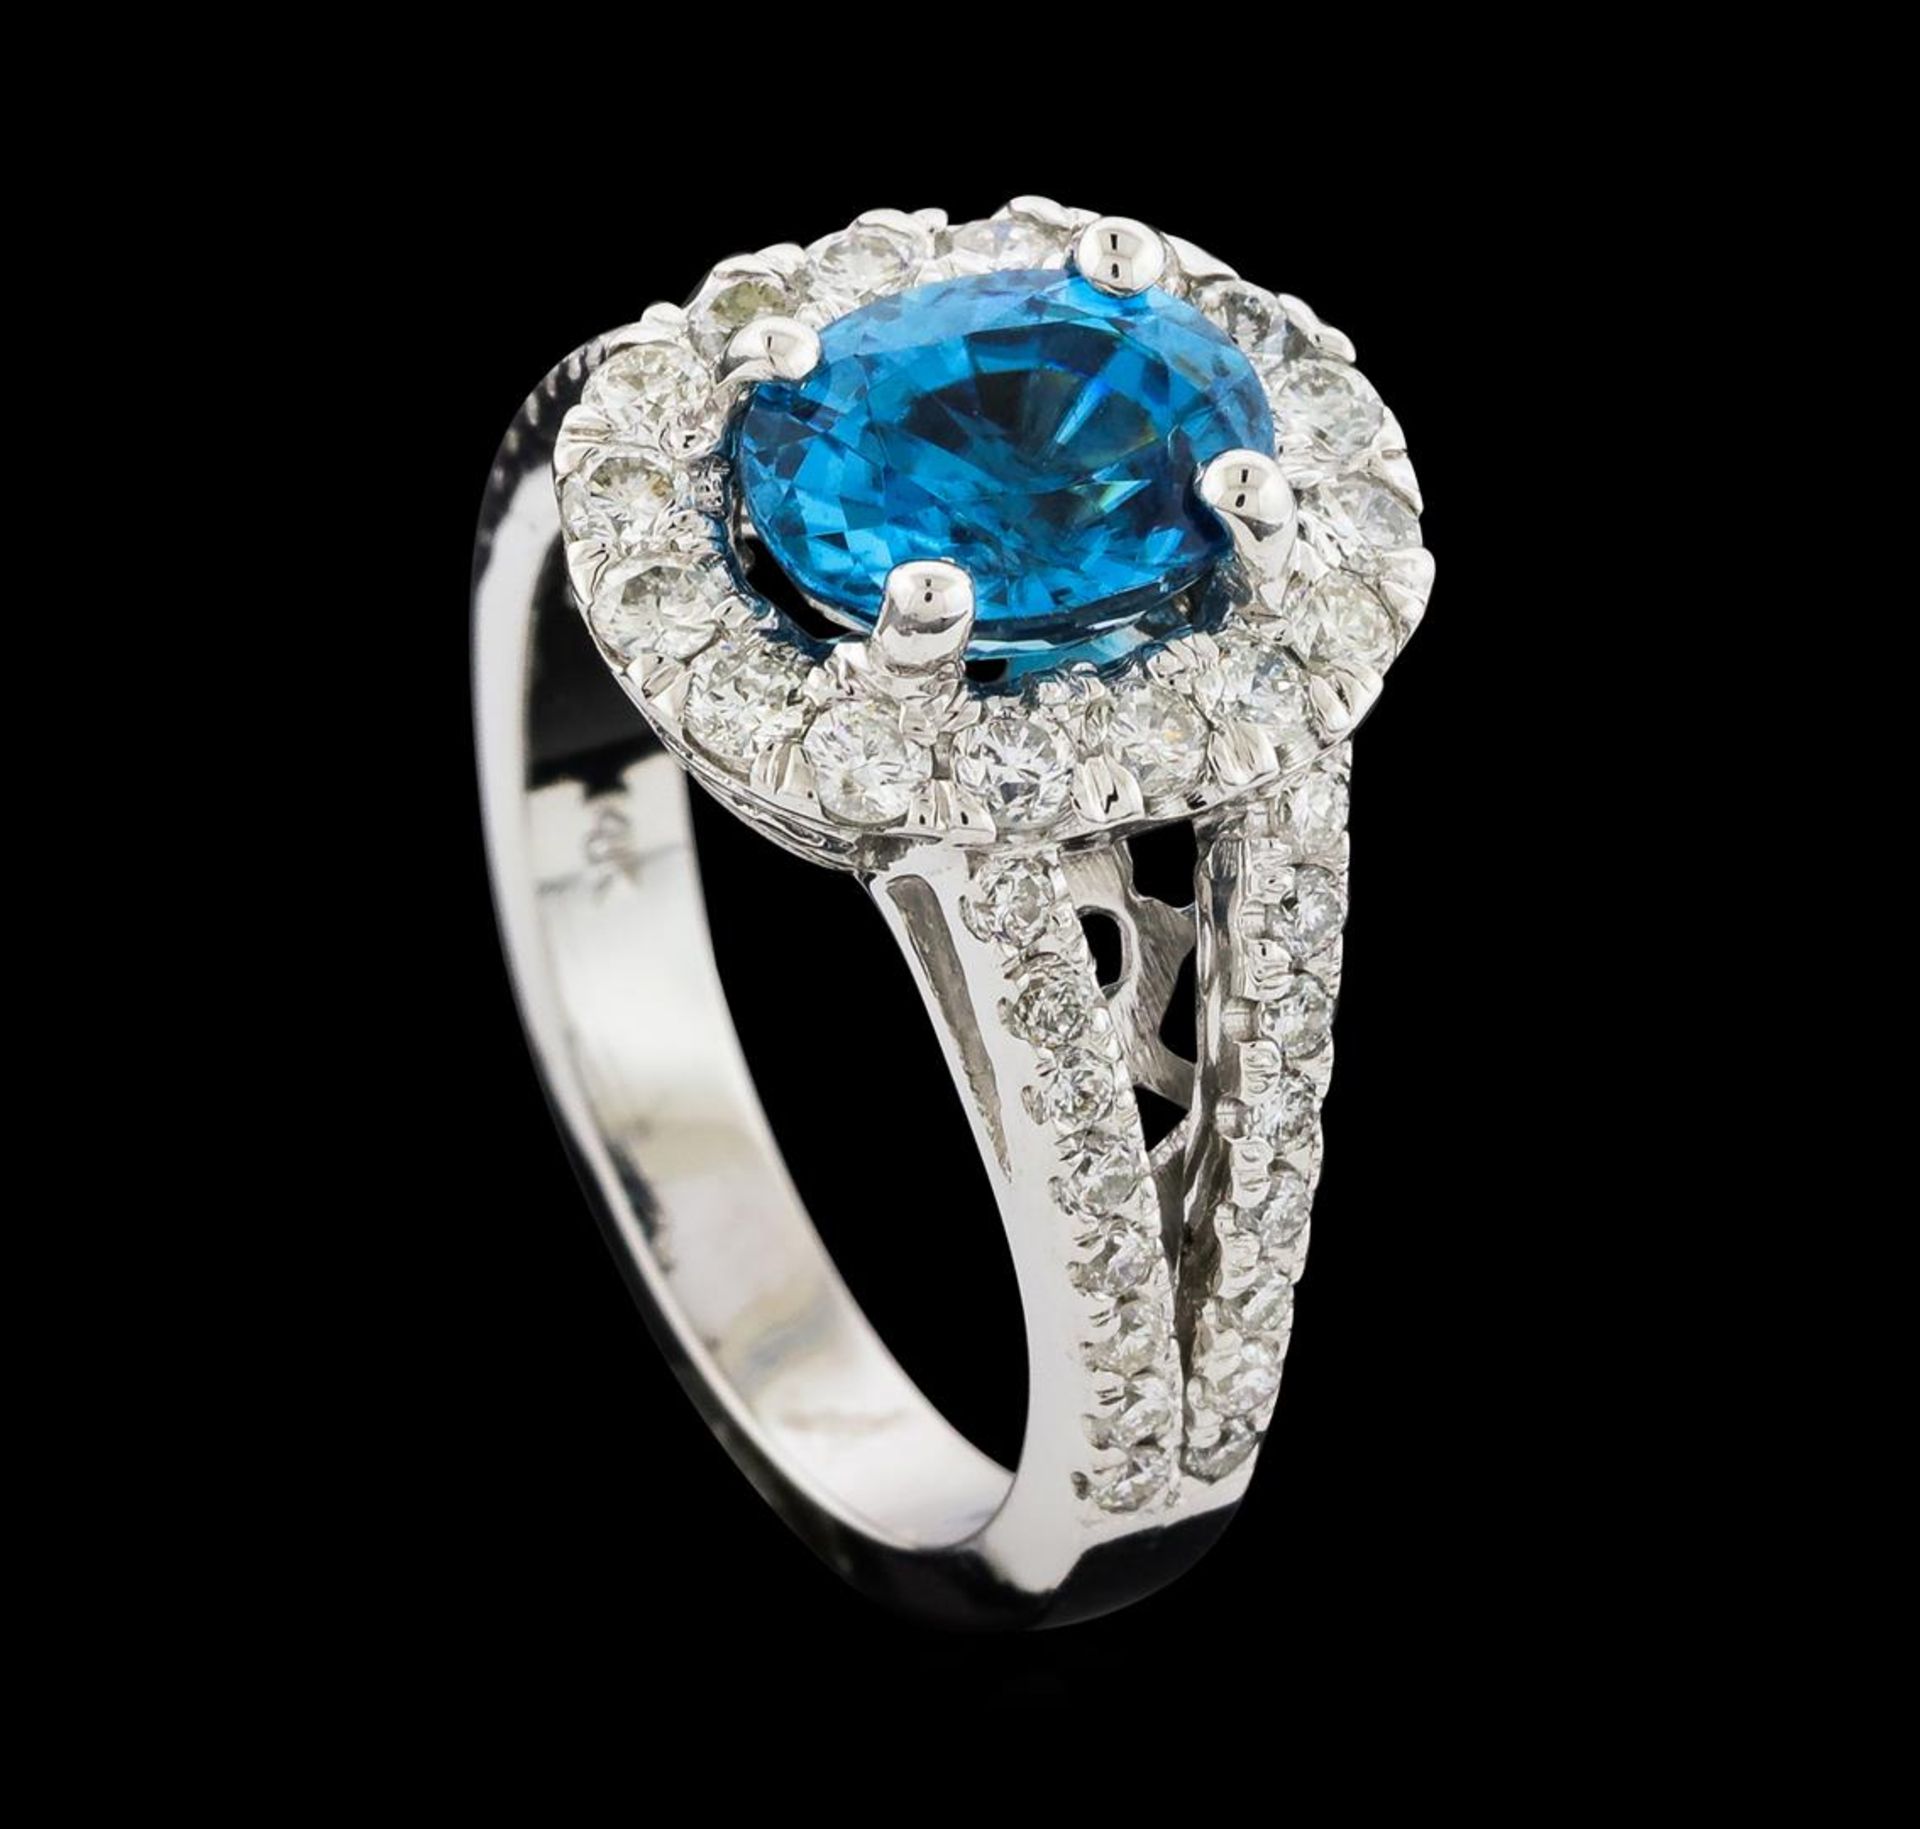 2.81 ctw Blue Zircon and Diamond Ring - 14KT White Gold - Image 4 of 5